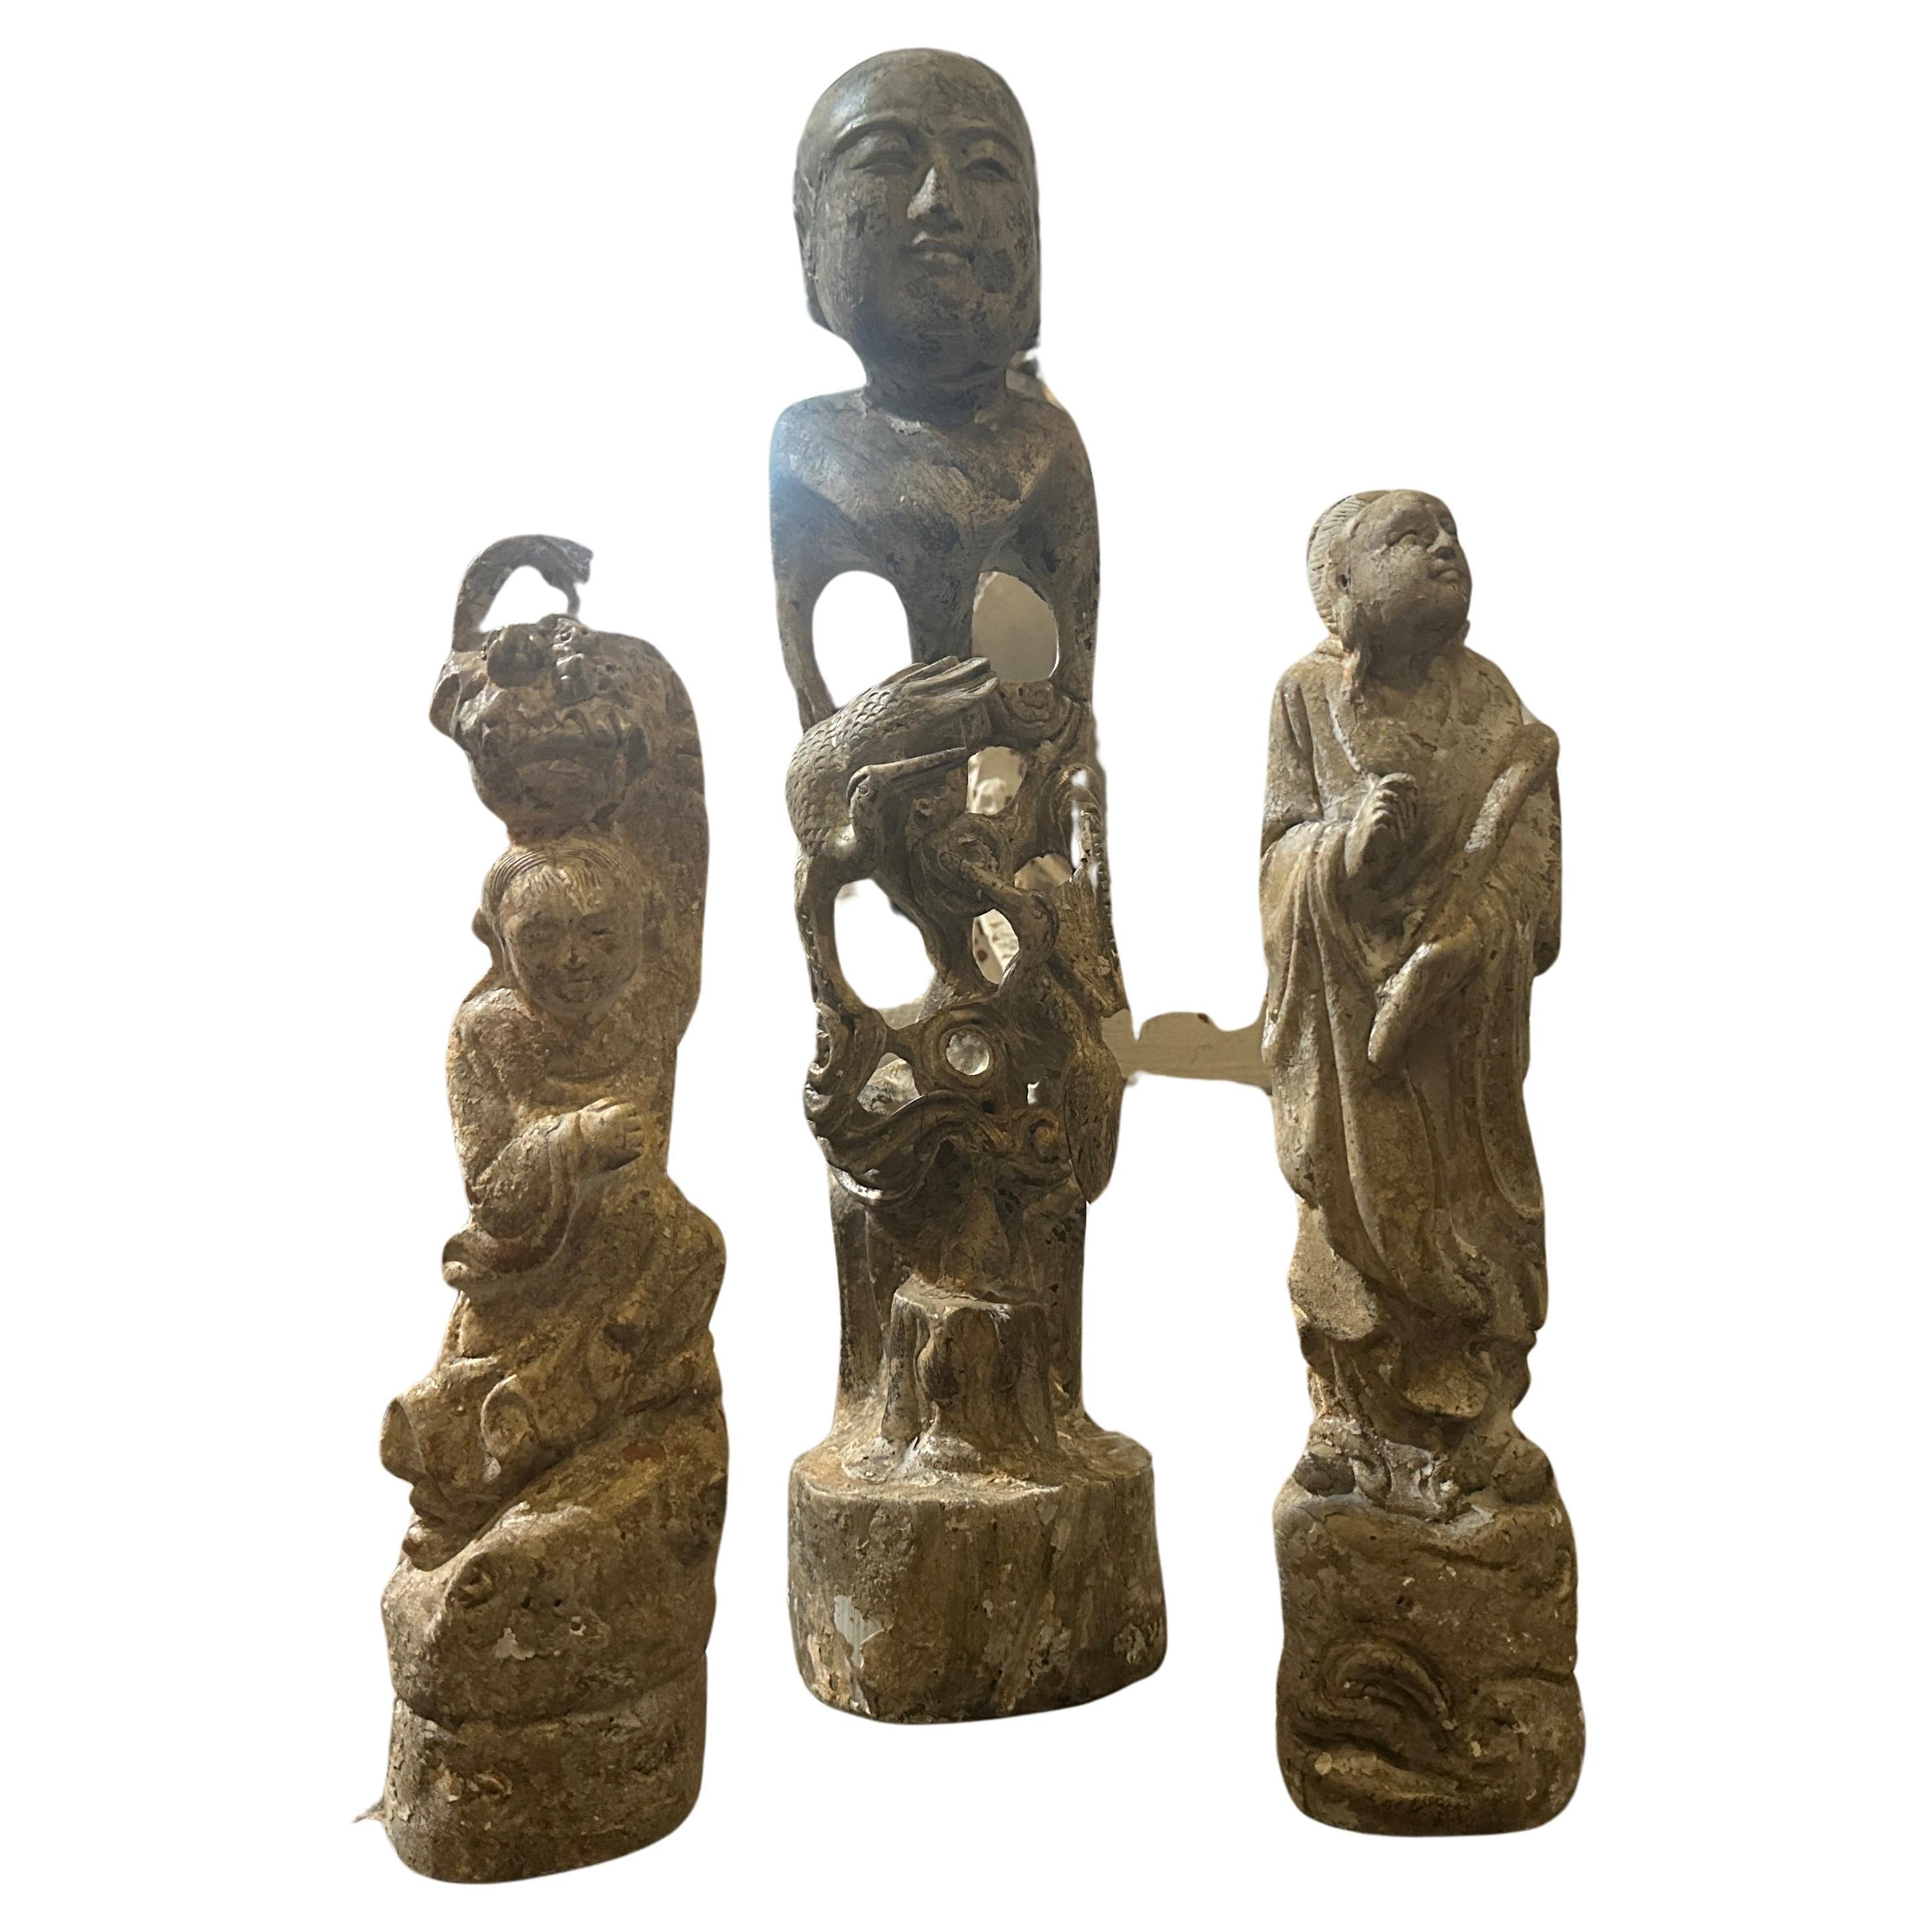 Three hand-carved wood chinese figures with a patina that makes them look like stone in good conditions with just signs of age. The finish applied to the wood that mimics the appearance of stone. This involves mottled surface treatment, giving the